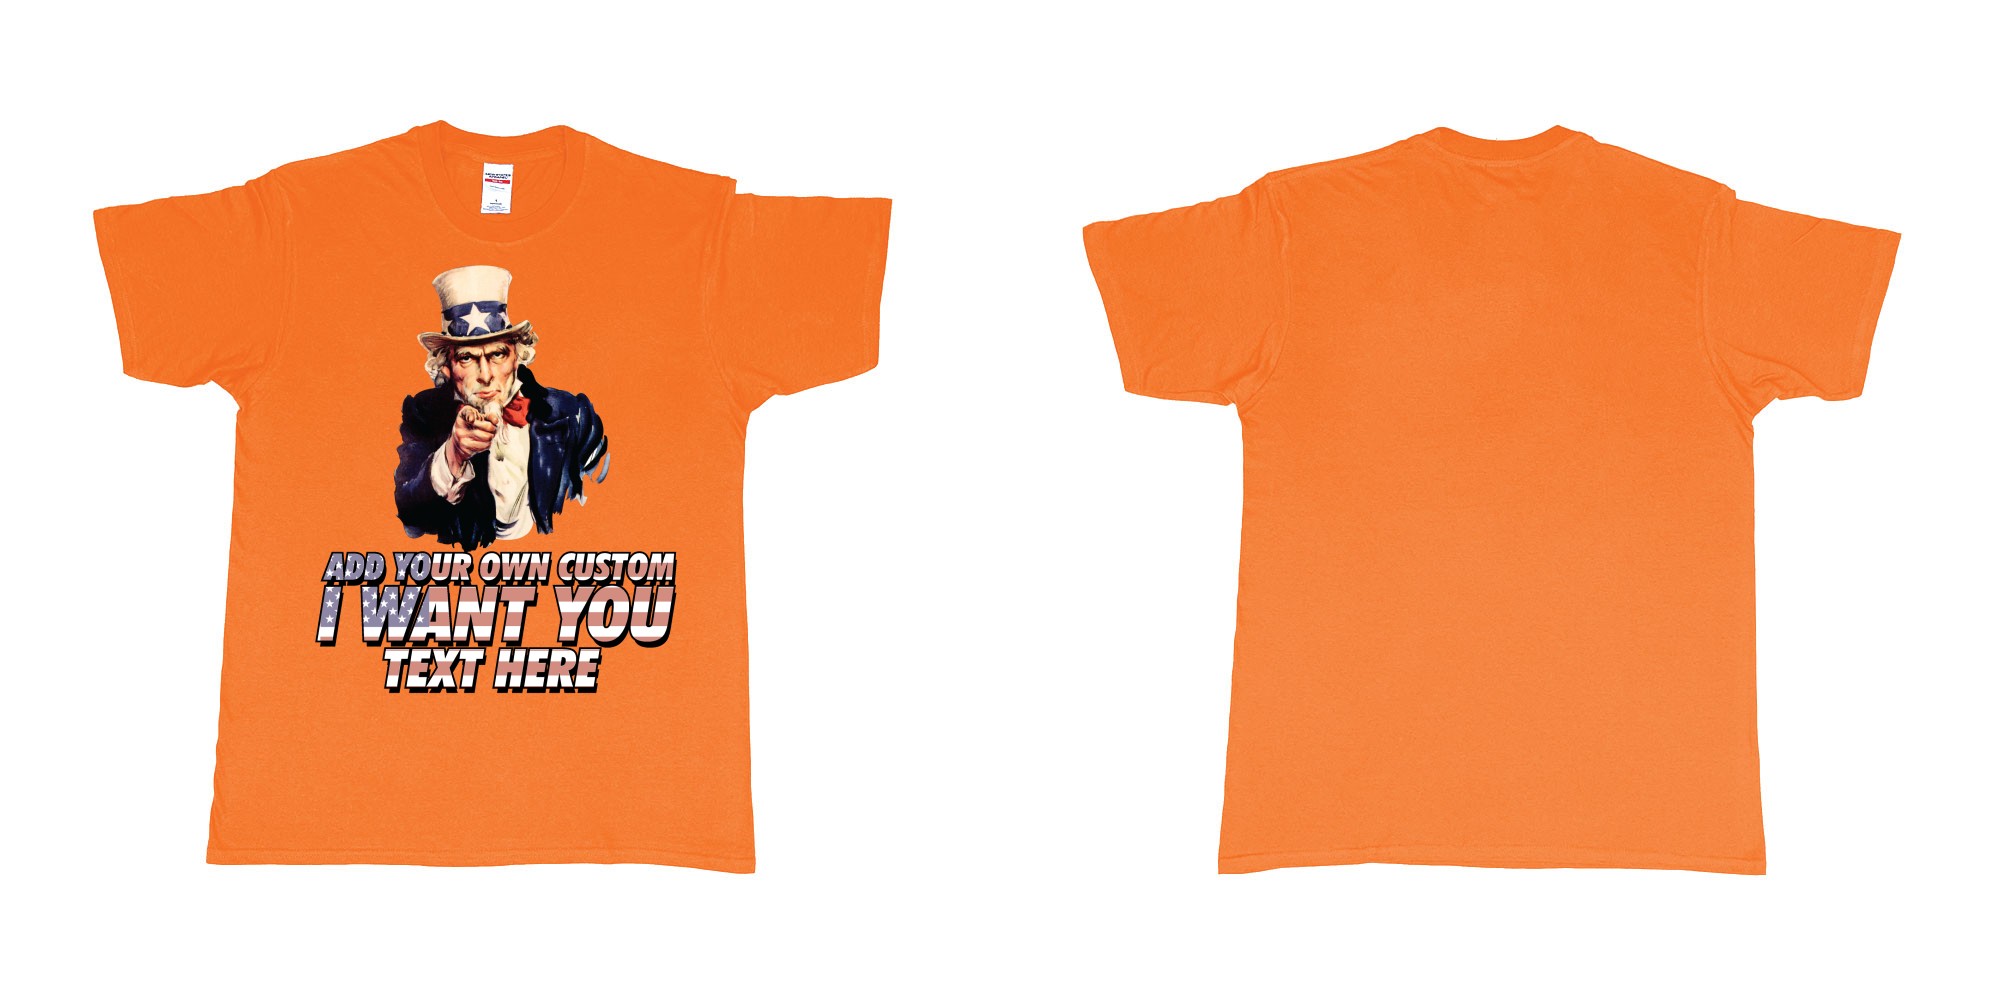 Custom tshirt design uncle sam i want you custom design own printing in fabric color orange choice your own text made in Bali by The Pirate Way